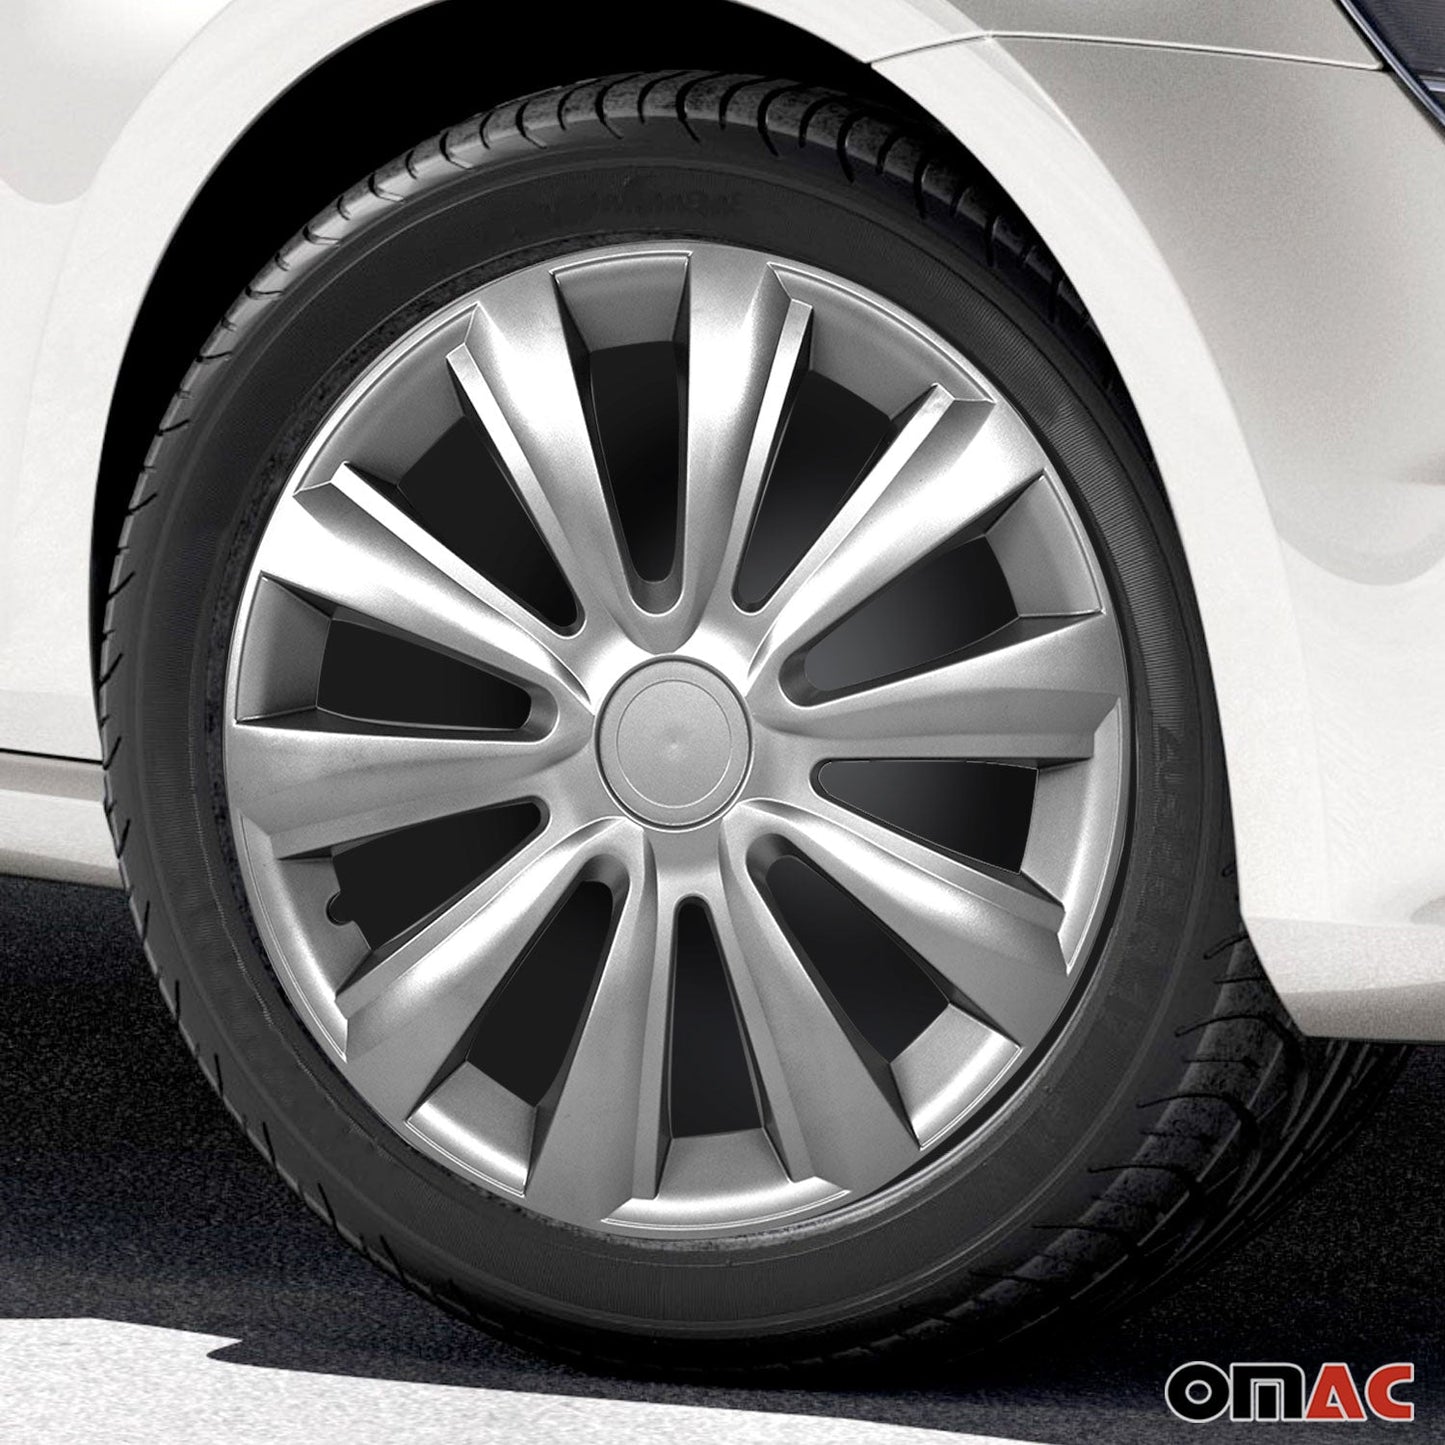 OMAC 16 Inch Wheel Covers Hubcaps for Chrysler Silver Gray Gloss G002332